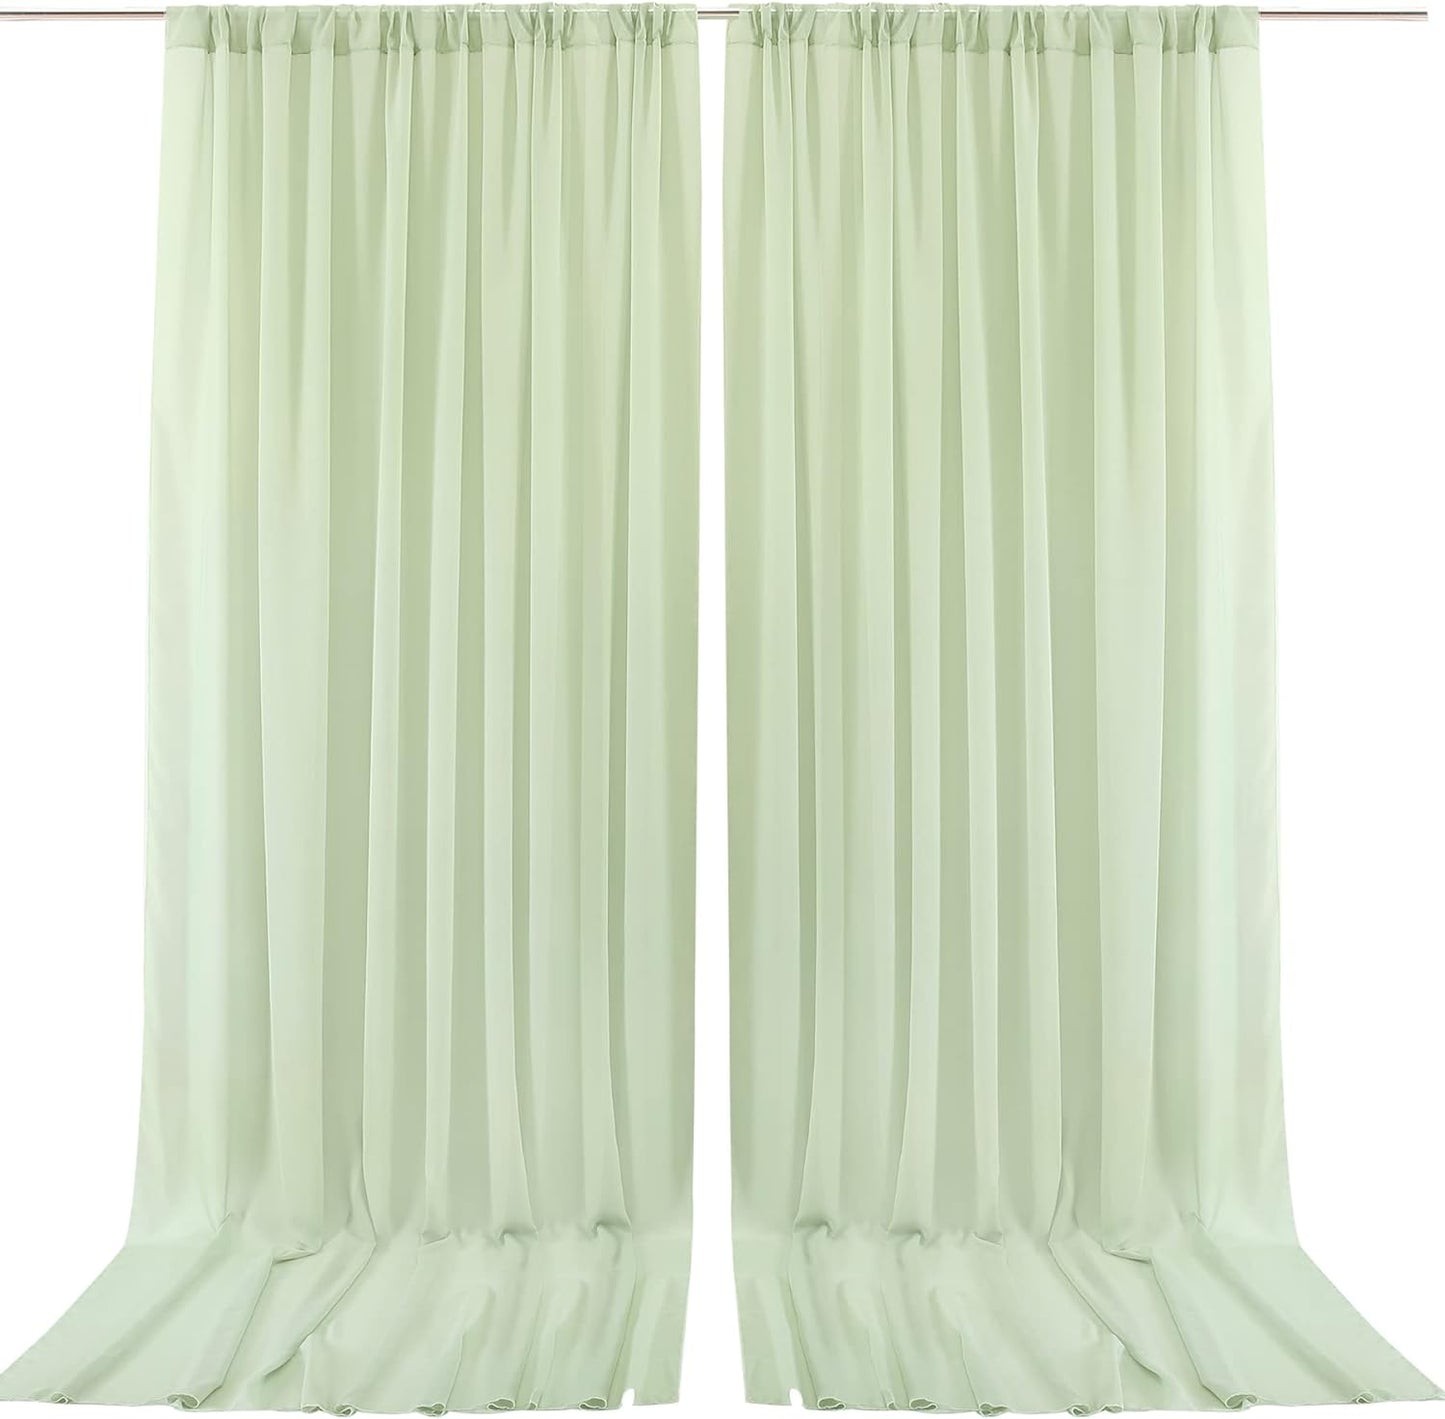 10Ft X 10Ft White Chiffon Backdrop Curtains, Wrinkle-Free Sheer Chiffon Fabric Curtain Drapes for Wedding Ceremony Arch Party Stage Decoration  Wish Care Sage Green  